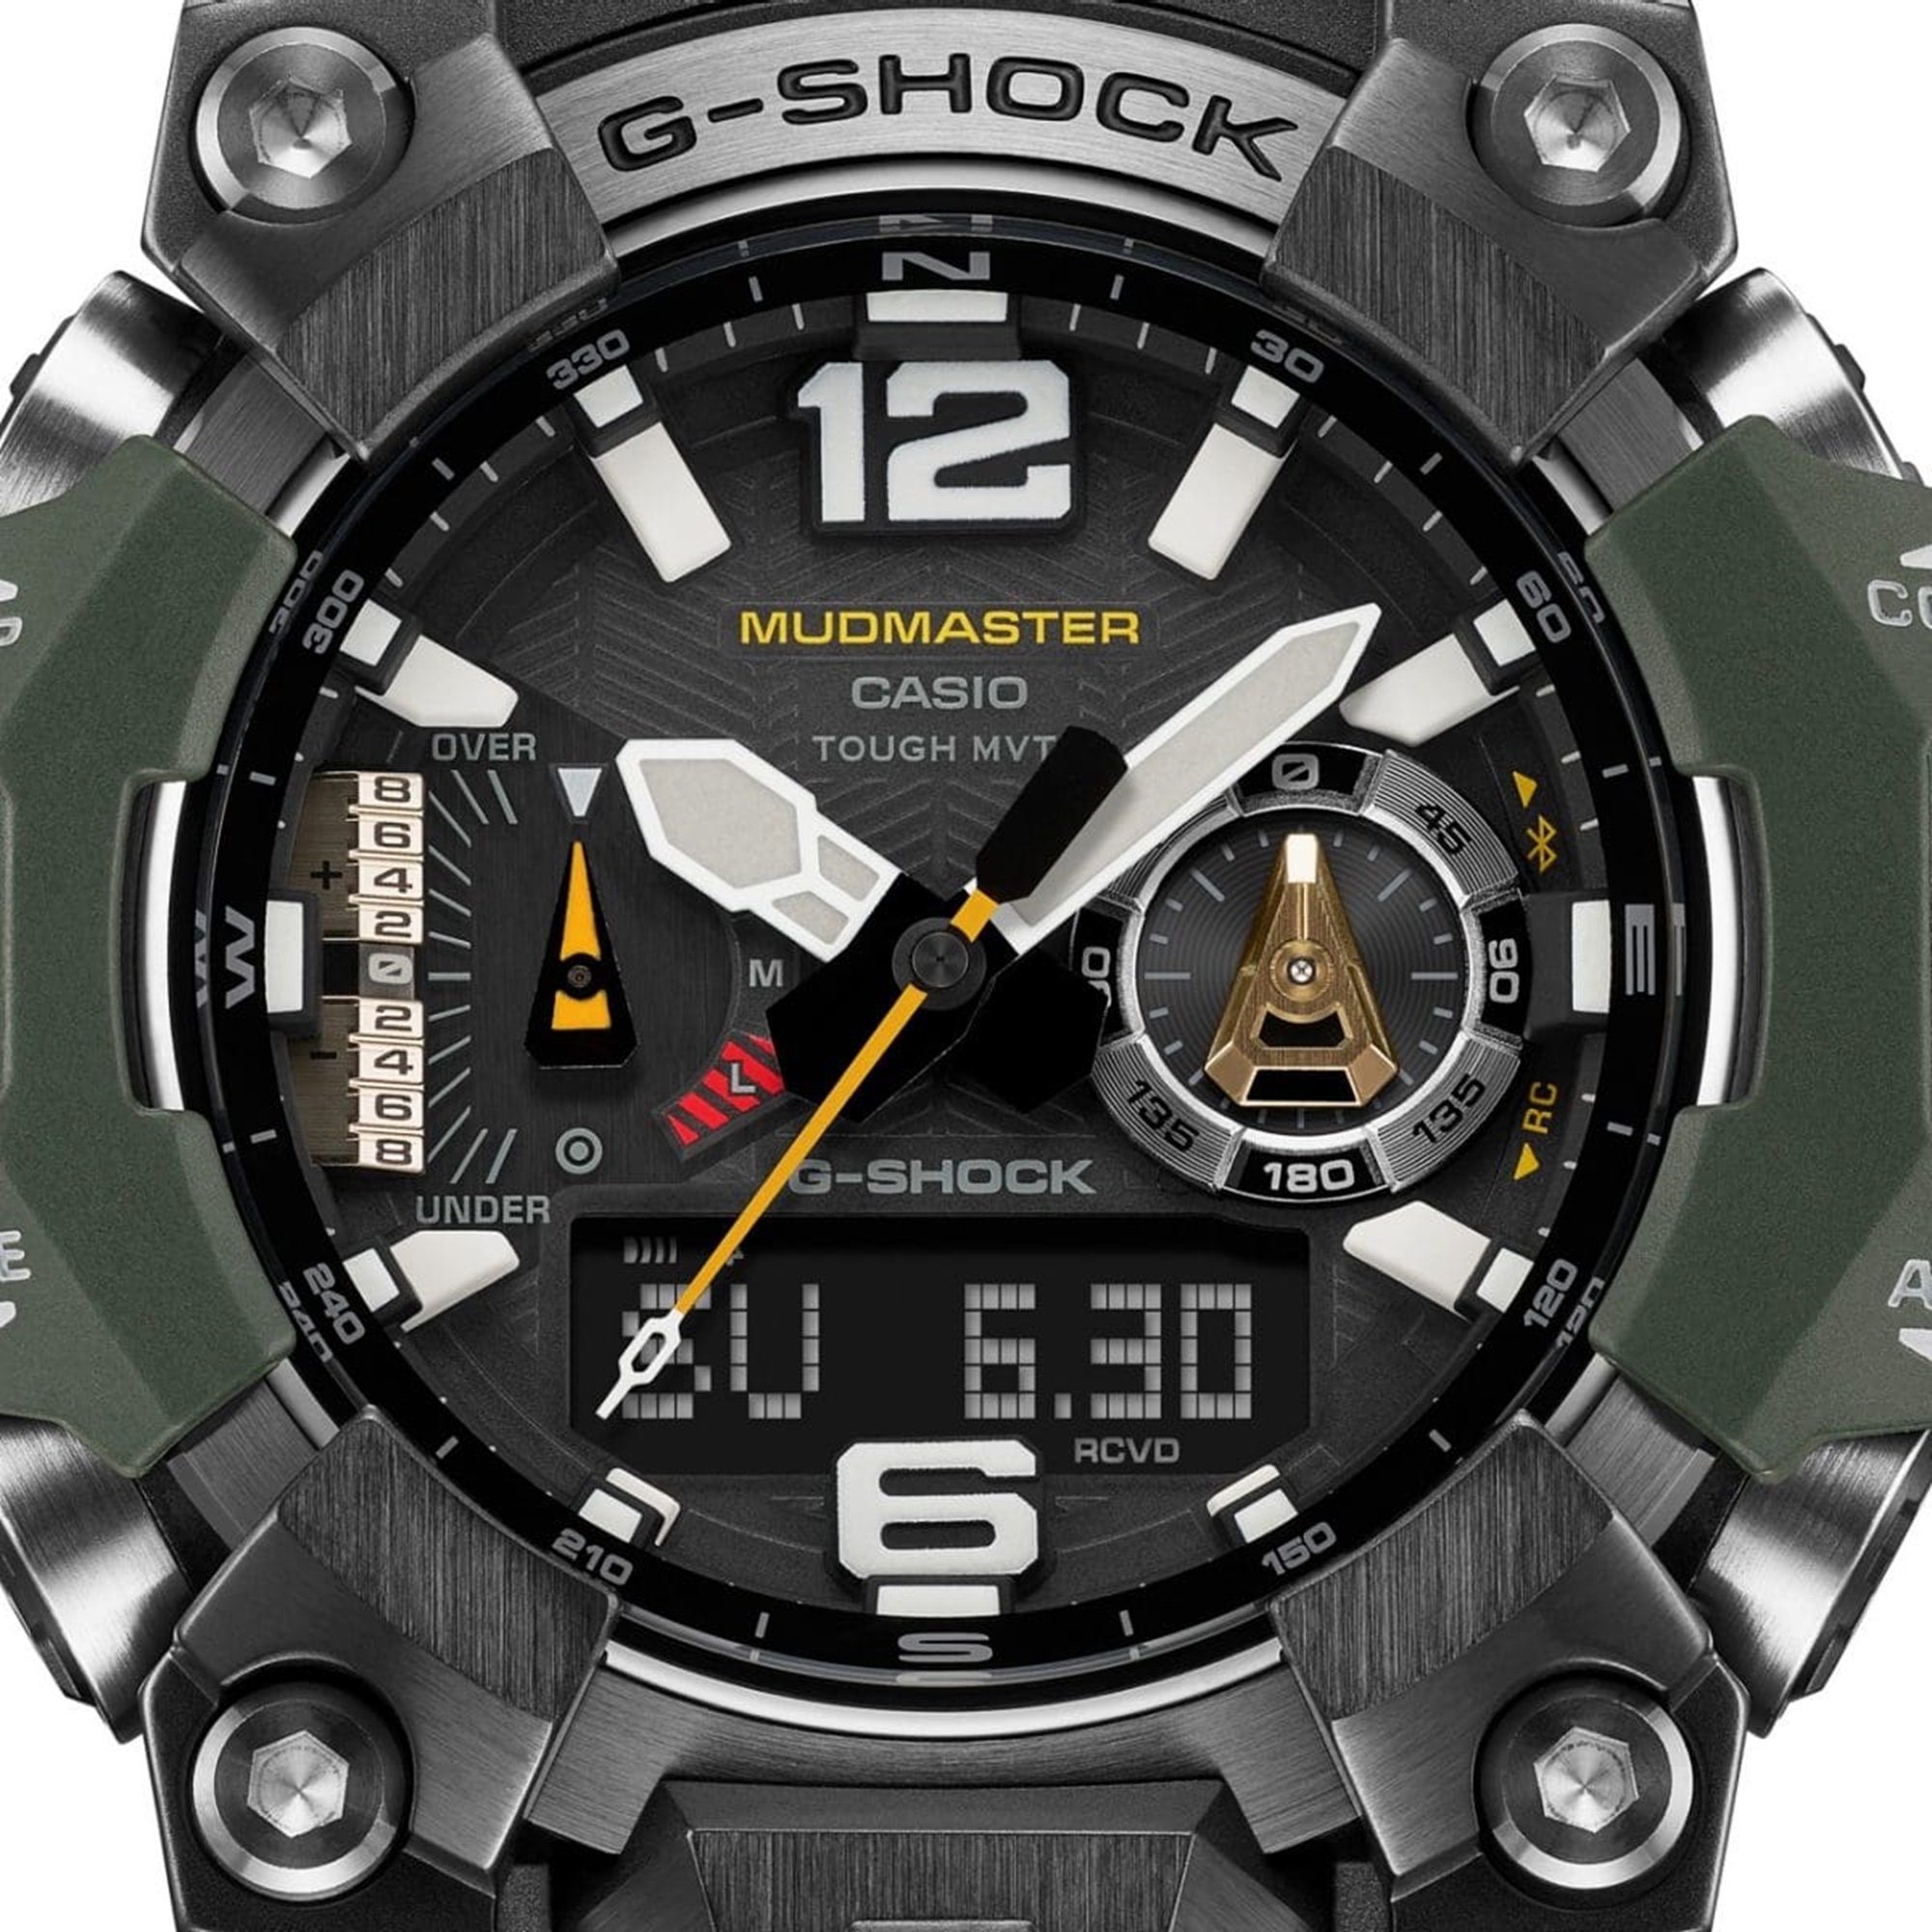 Differences Between Waterproof and Water-Resistant Watches